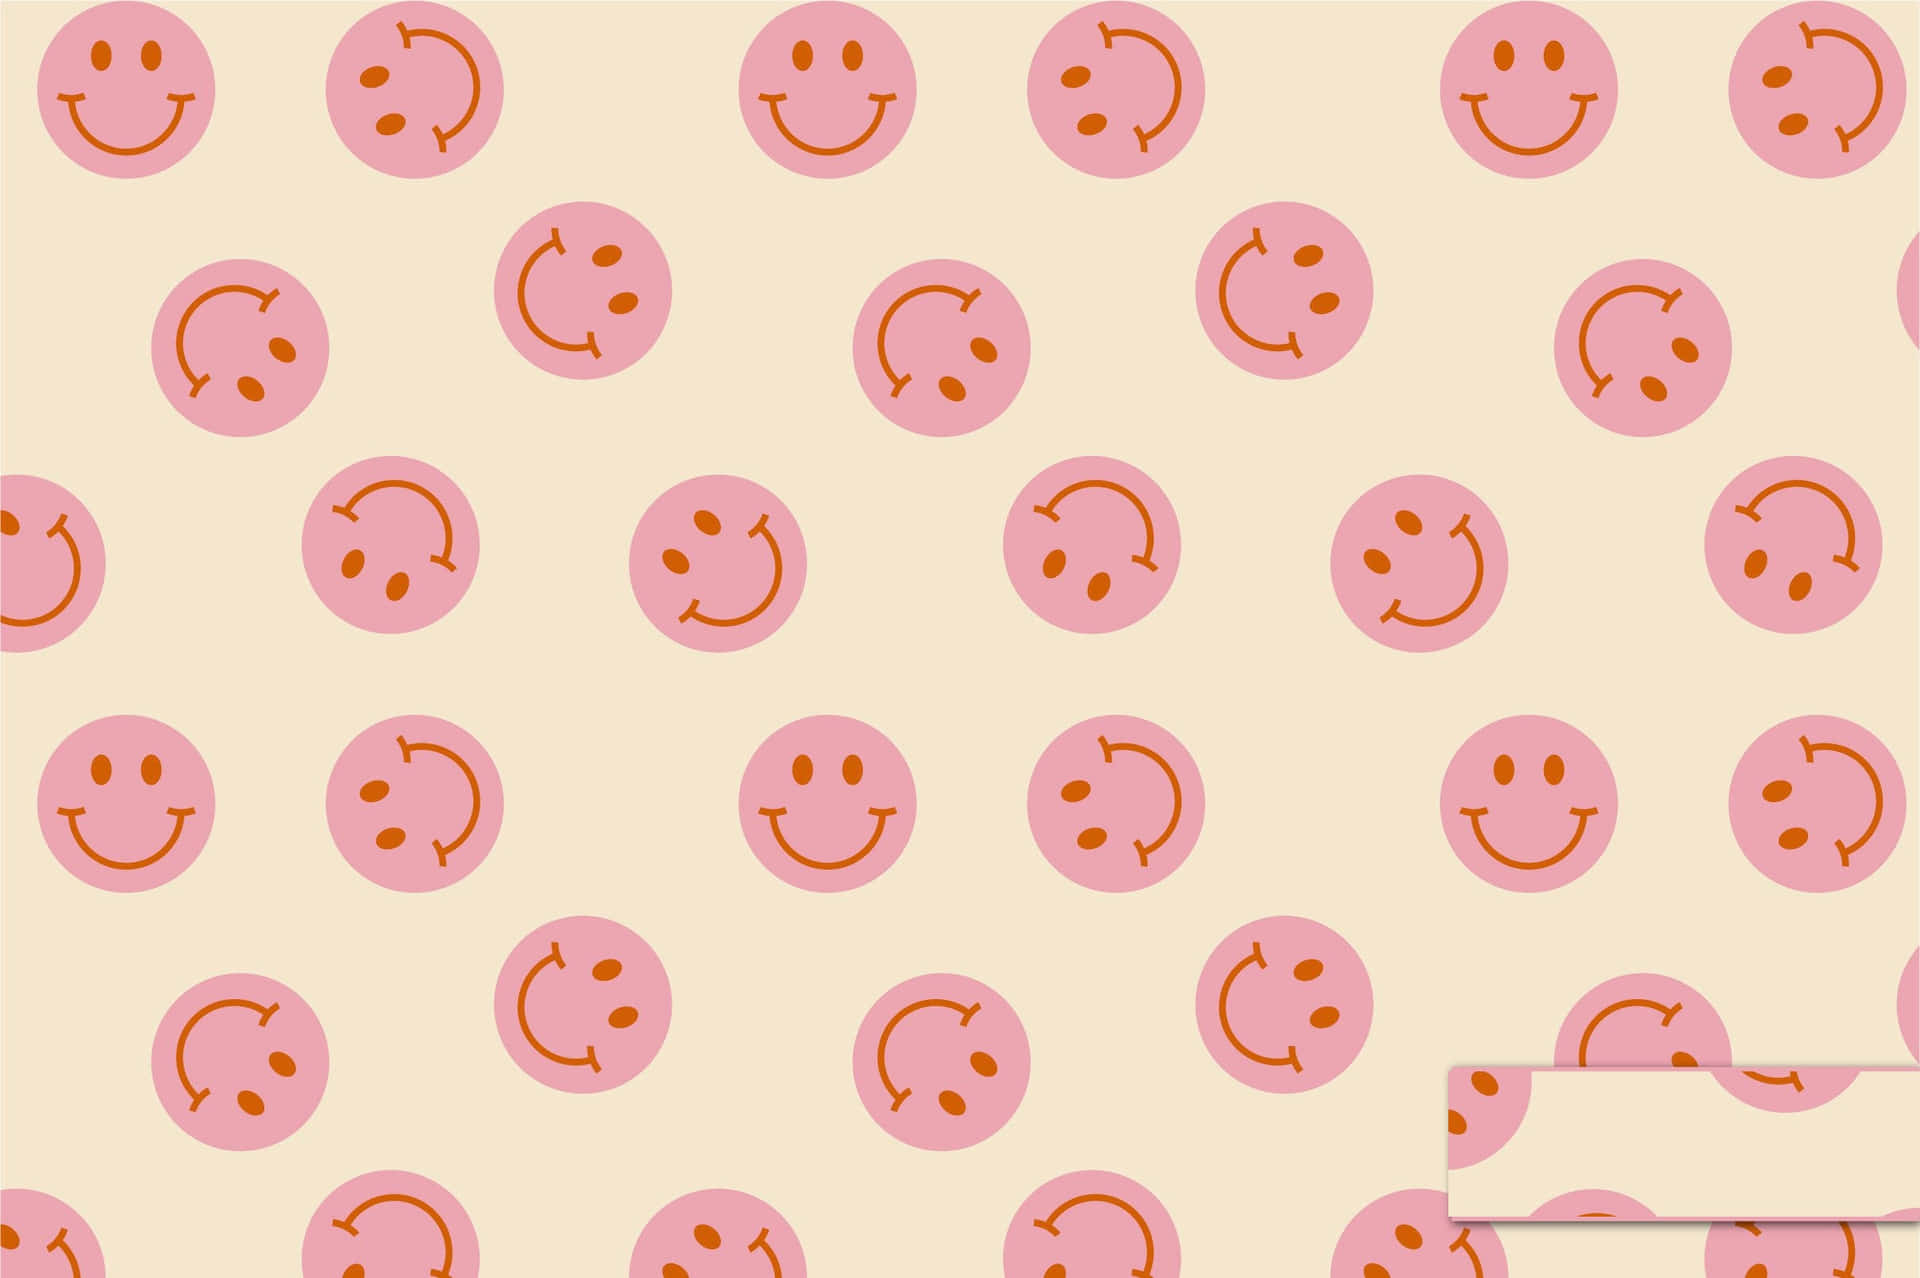 Add some Preppy Pizzazz to your Look with this Smiley Face!